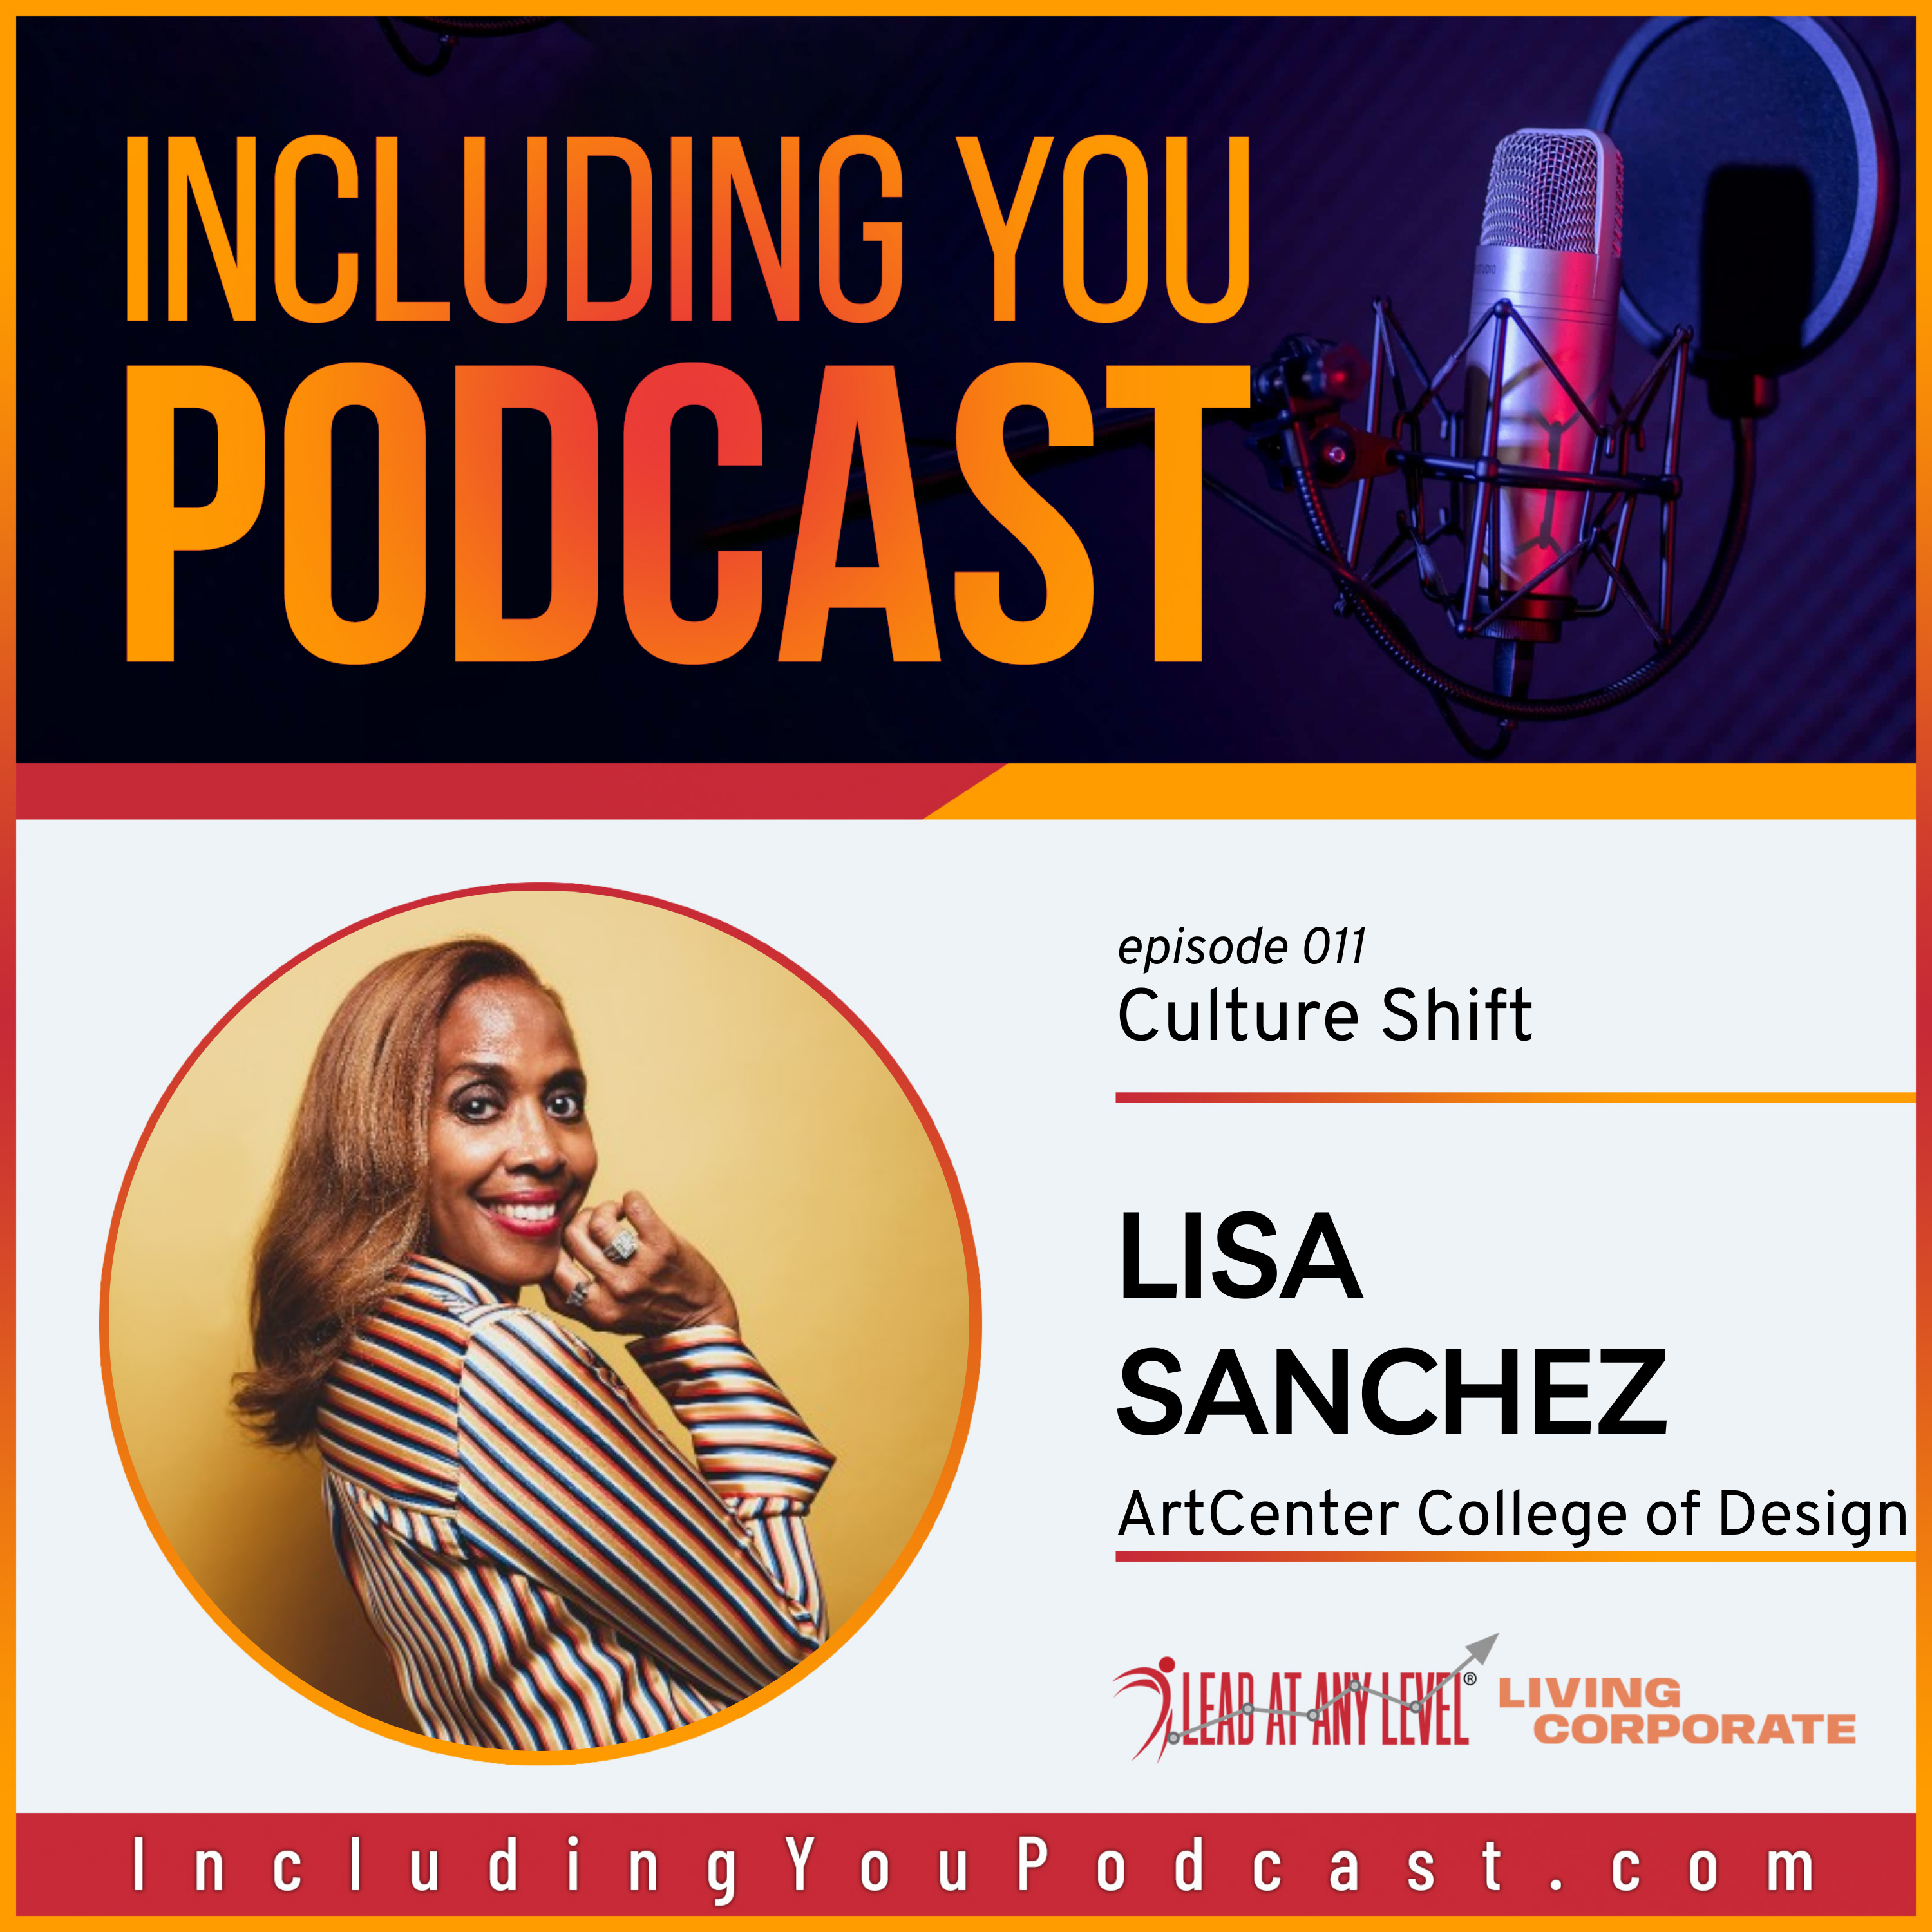 Culture Shift with Lisa Sanchez (Including You podcast)